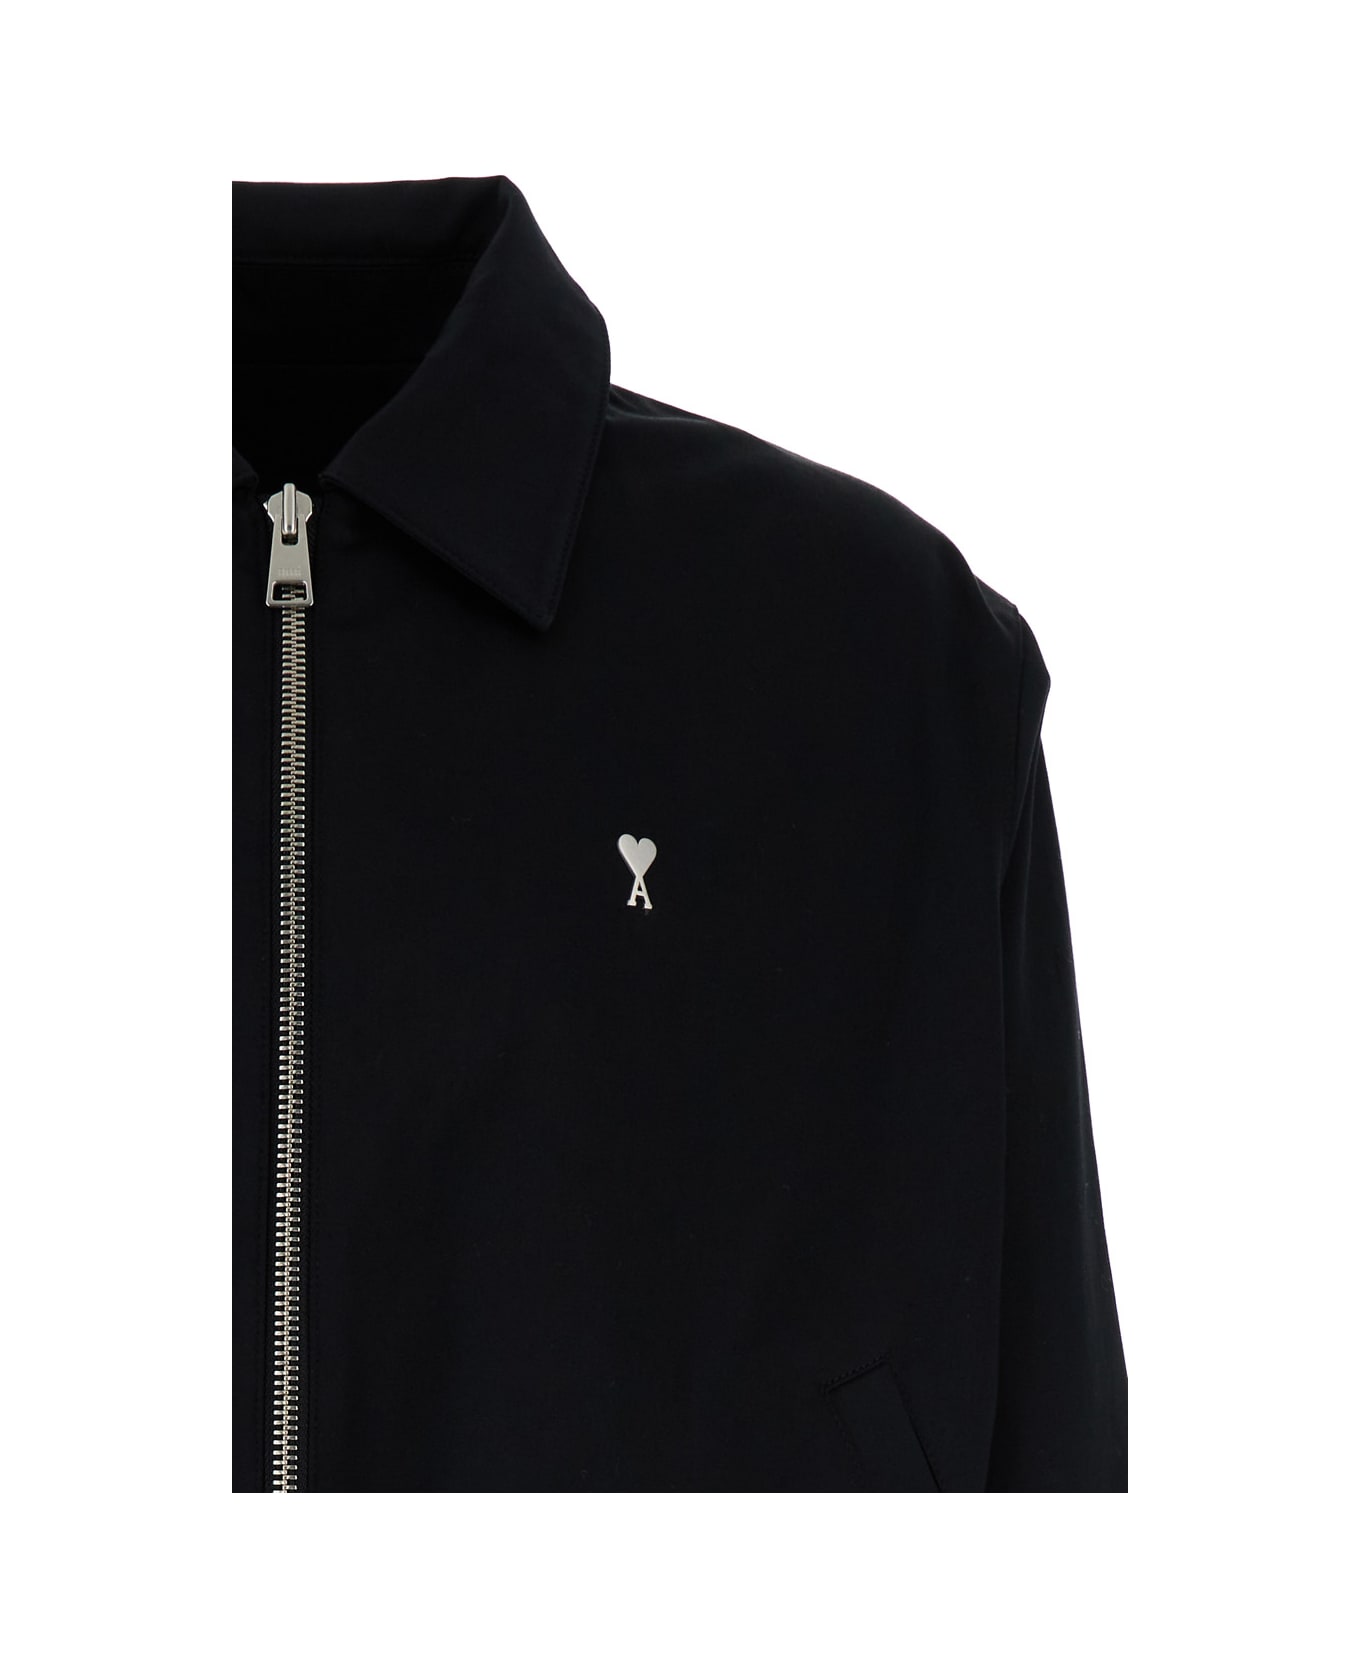 Ami Alexandre Mattiussi Black Jacket With Collar And Adc Logo In Cotton Man - Black